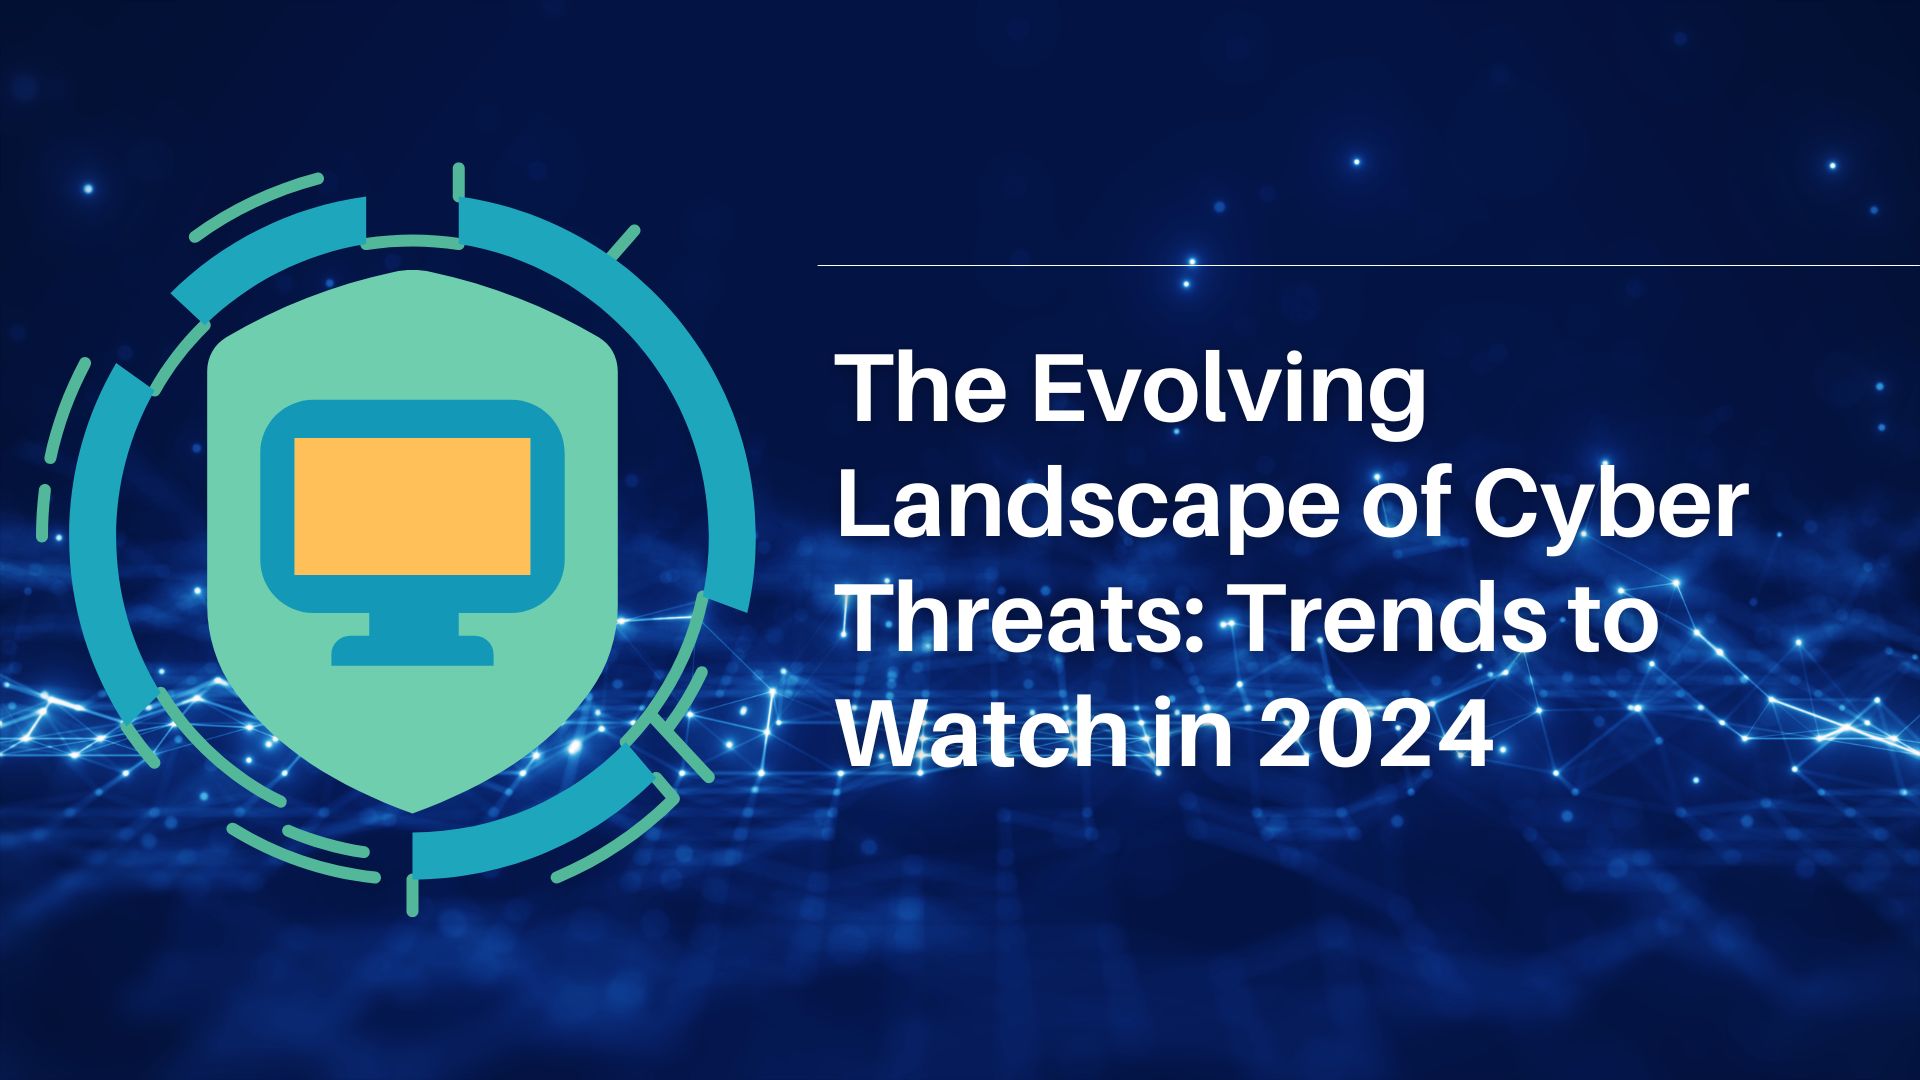 photo_The Evolving Landscape of Cyber Threats Trends to Watch in 2024.jpg